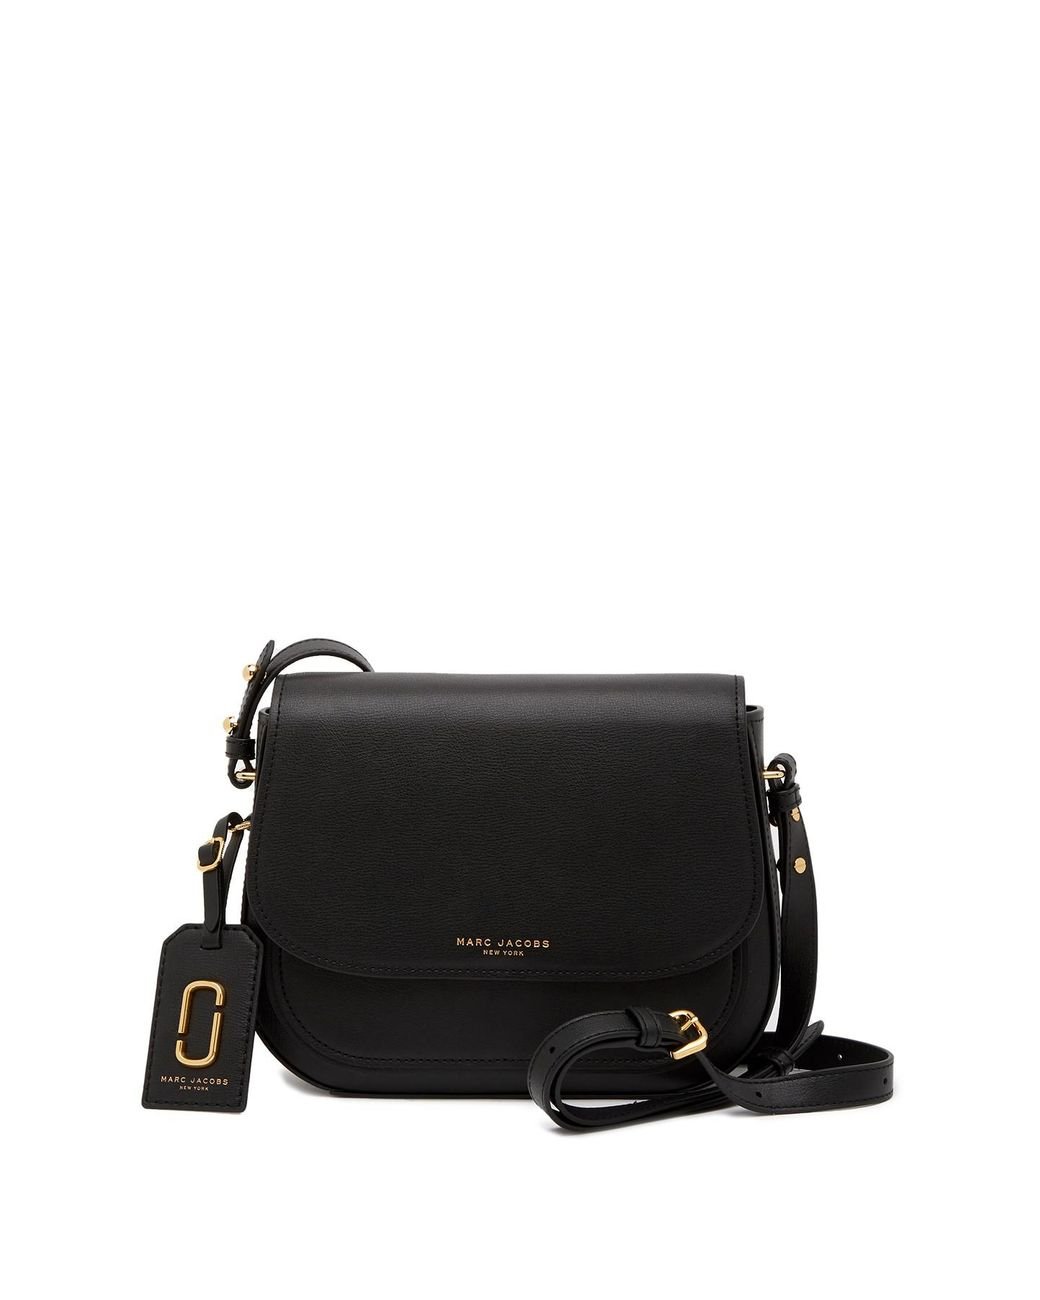 Marc Jacobs Rider Leather Crossbody Bag in Black | Lyst